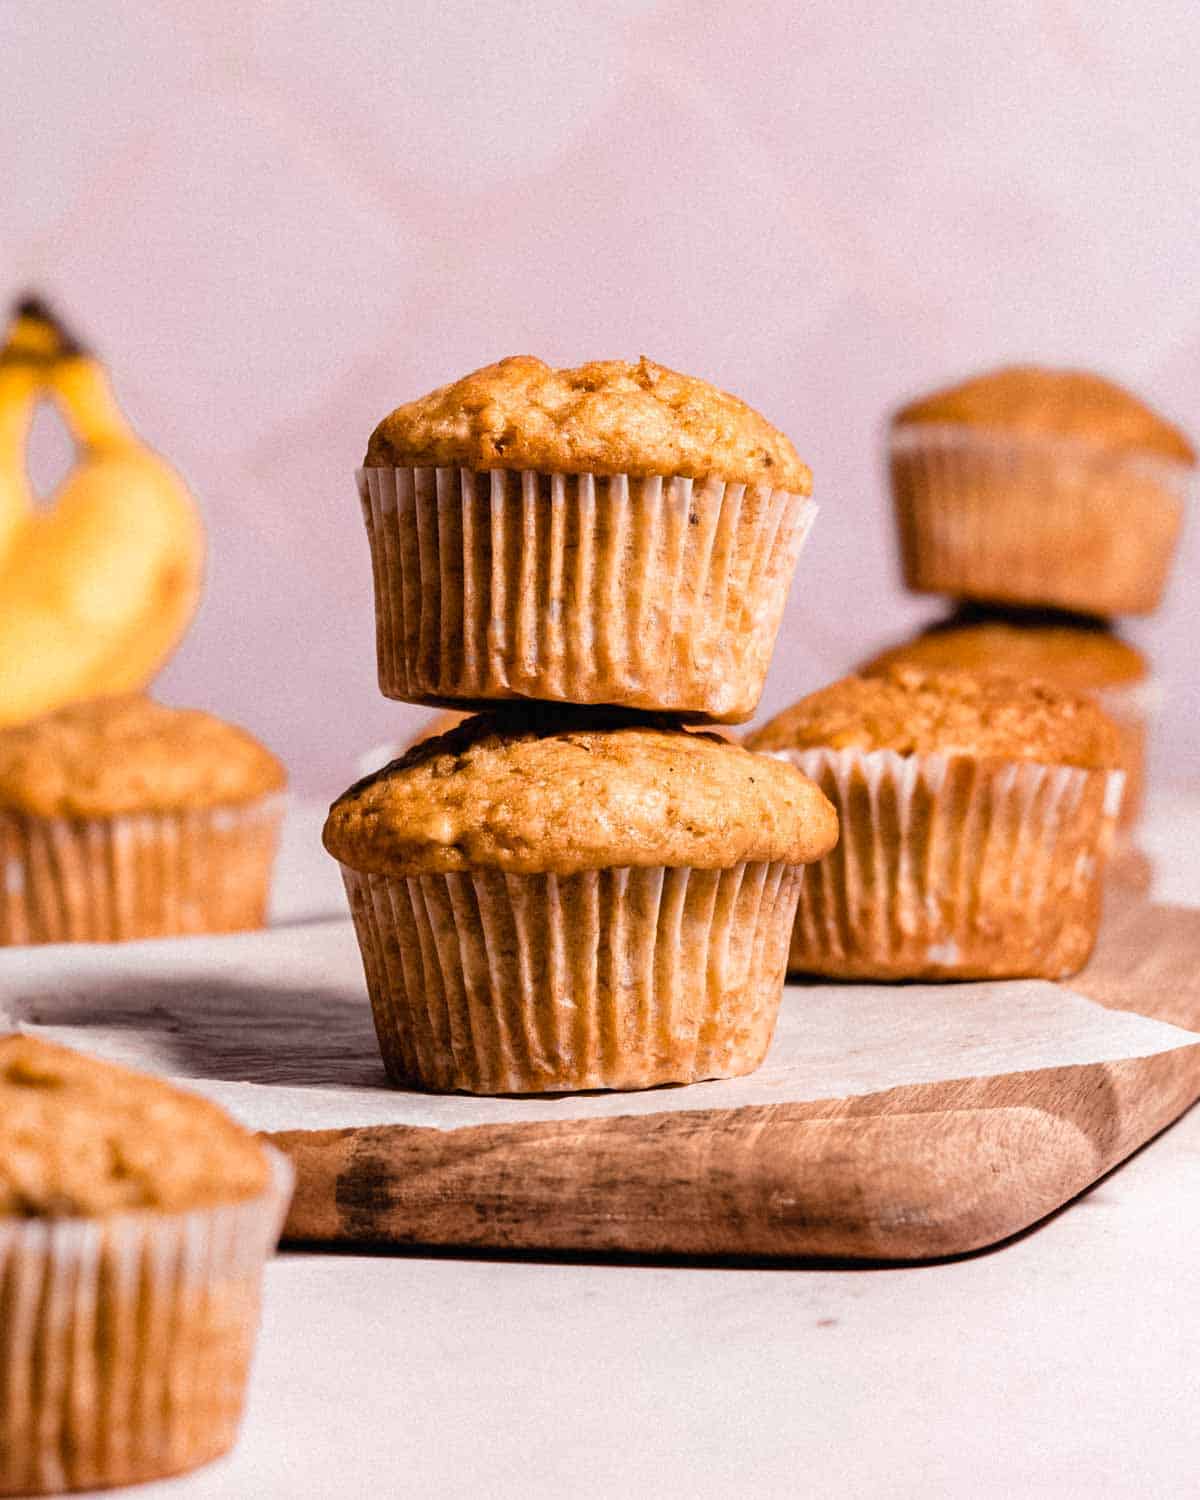 stack of 2 oil banana muffins on a wooden cutting board, in the background more muffins and 2 bananas.